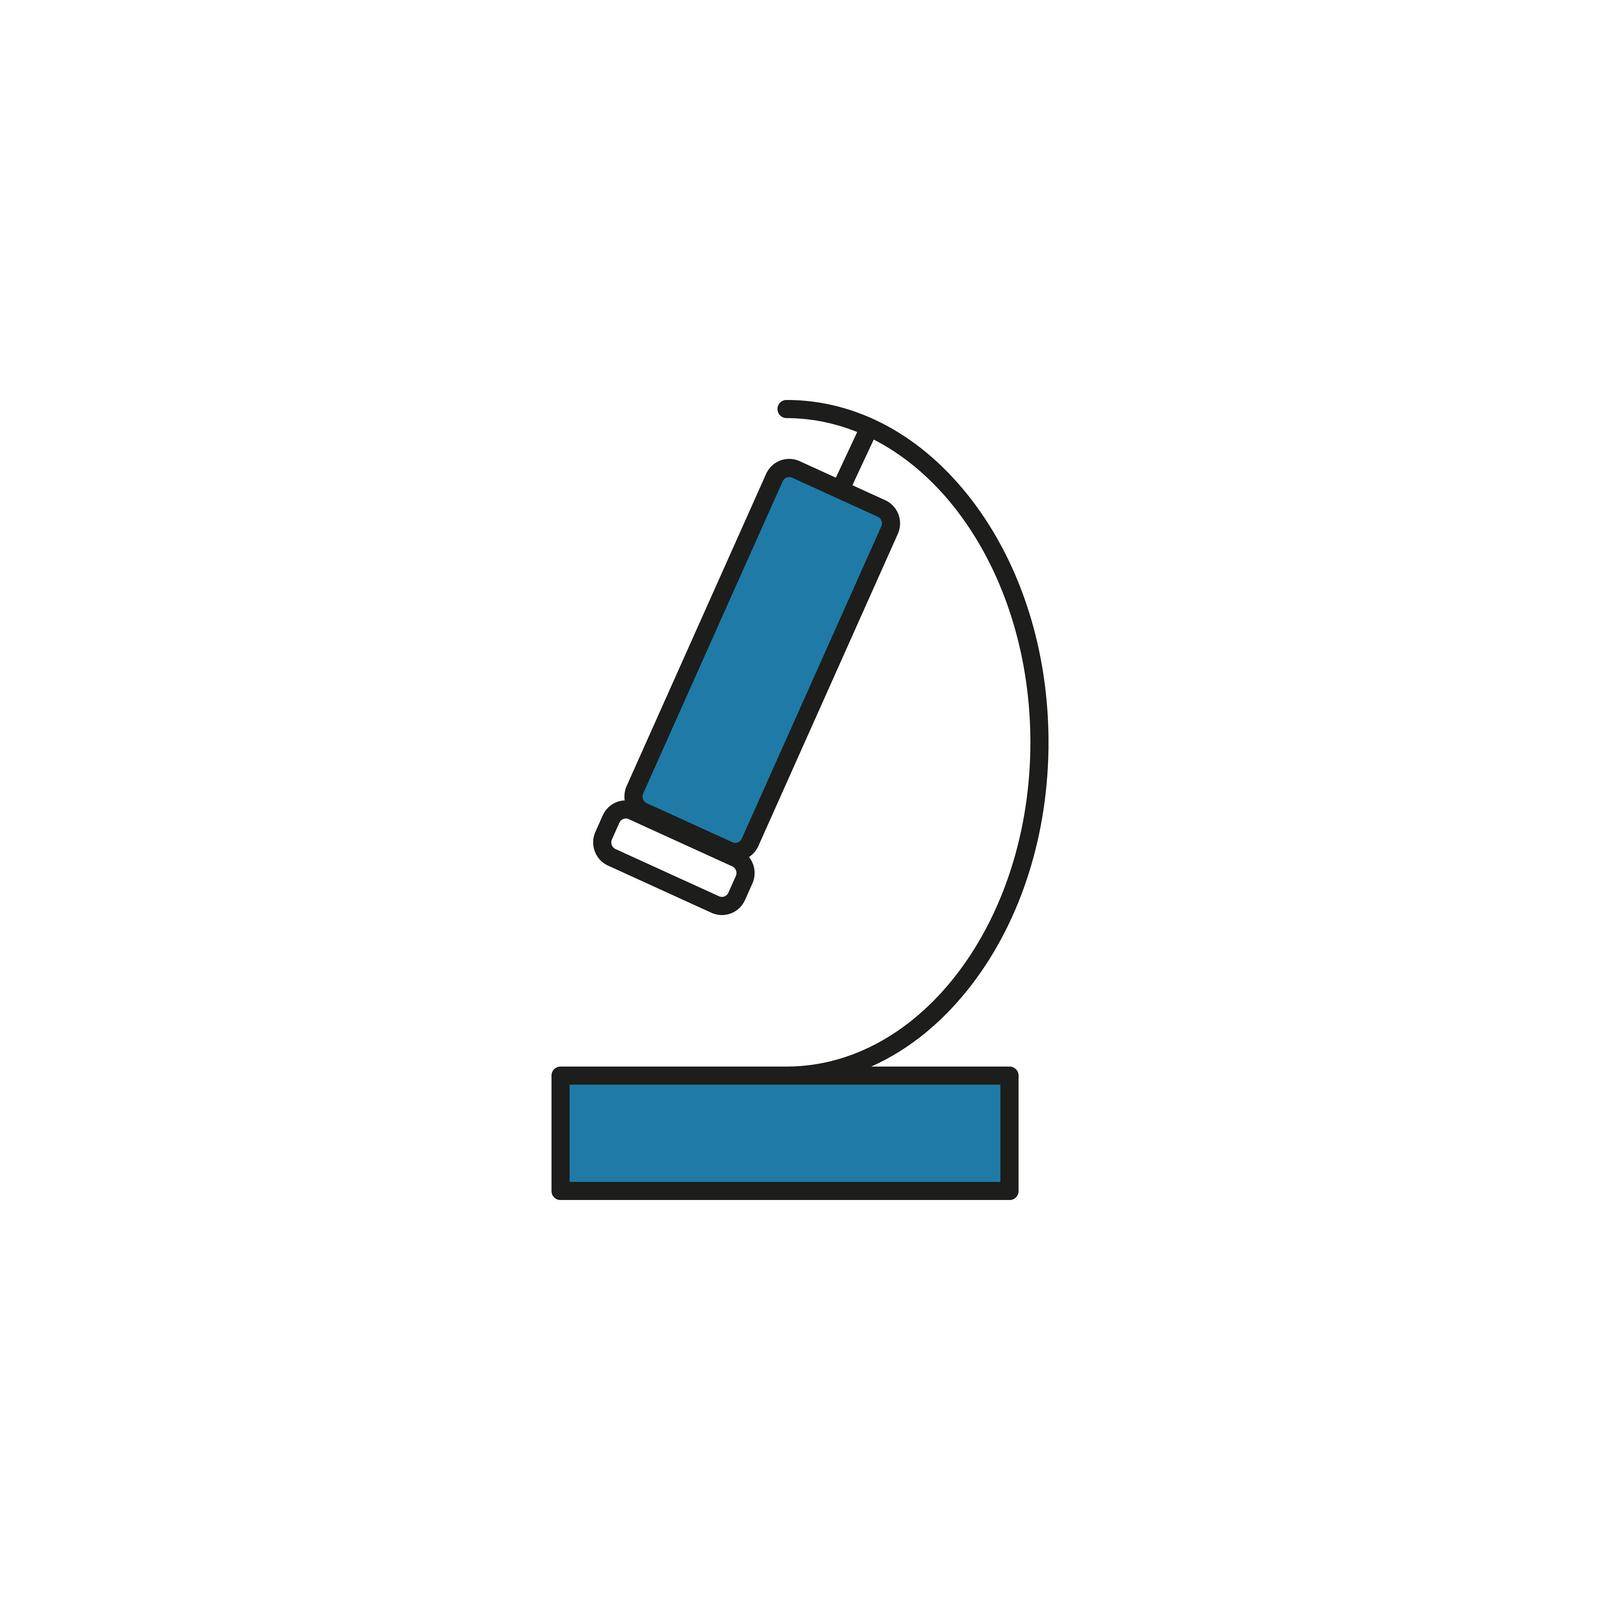 Microscope line icon. Simple image medical laboratory equipment for biomaterial analysis isolated vector. Medical device logo. Web element medicine and science